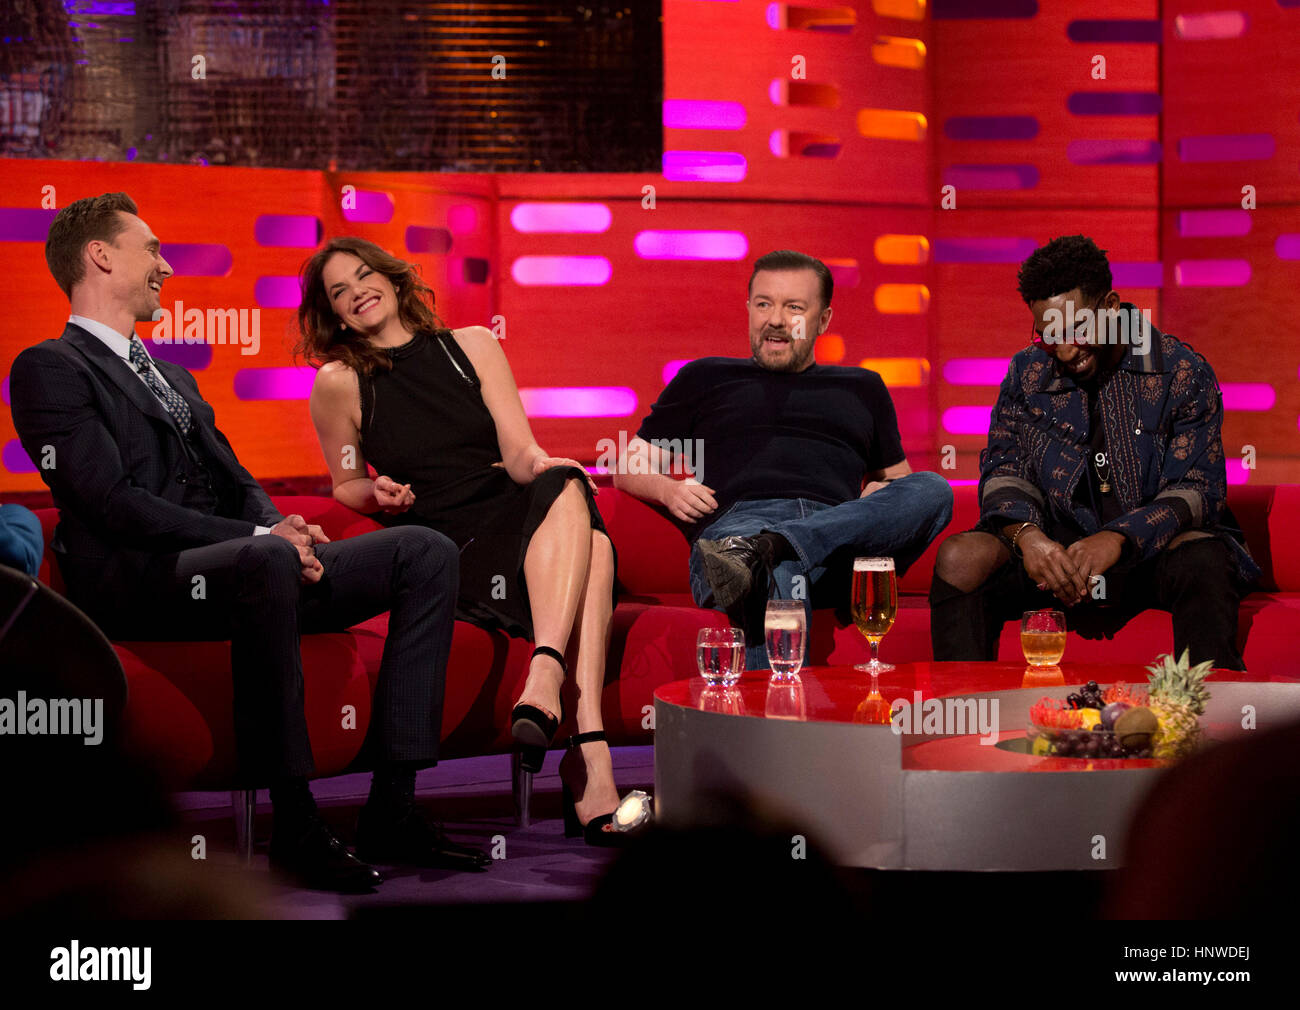 (left to right )Tom Hiddleston, Ruth Wilson, Ricky Gervais and Tinie Tempah during filming of the Graham Norton Show at The London Studios, to be aired on BBC One on Friday February 17, 2017. Stock Photo